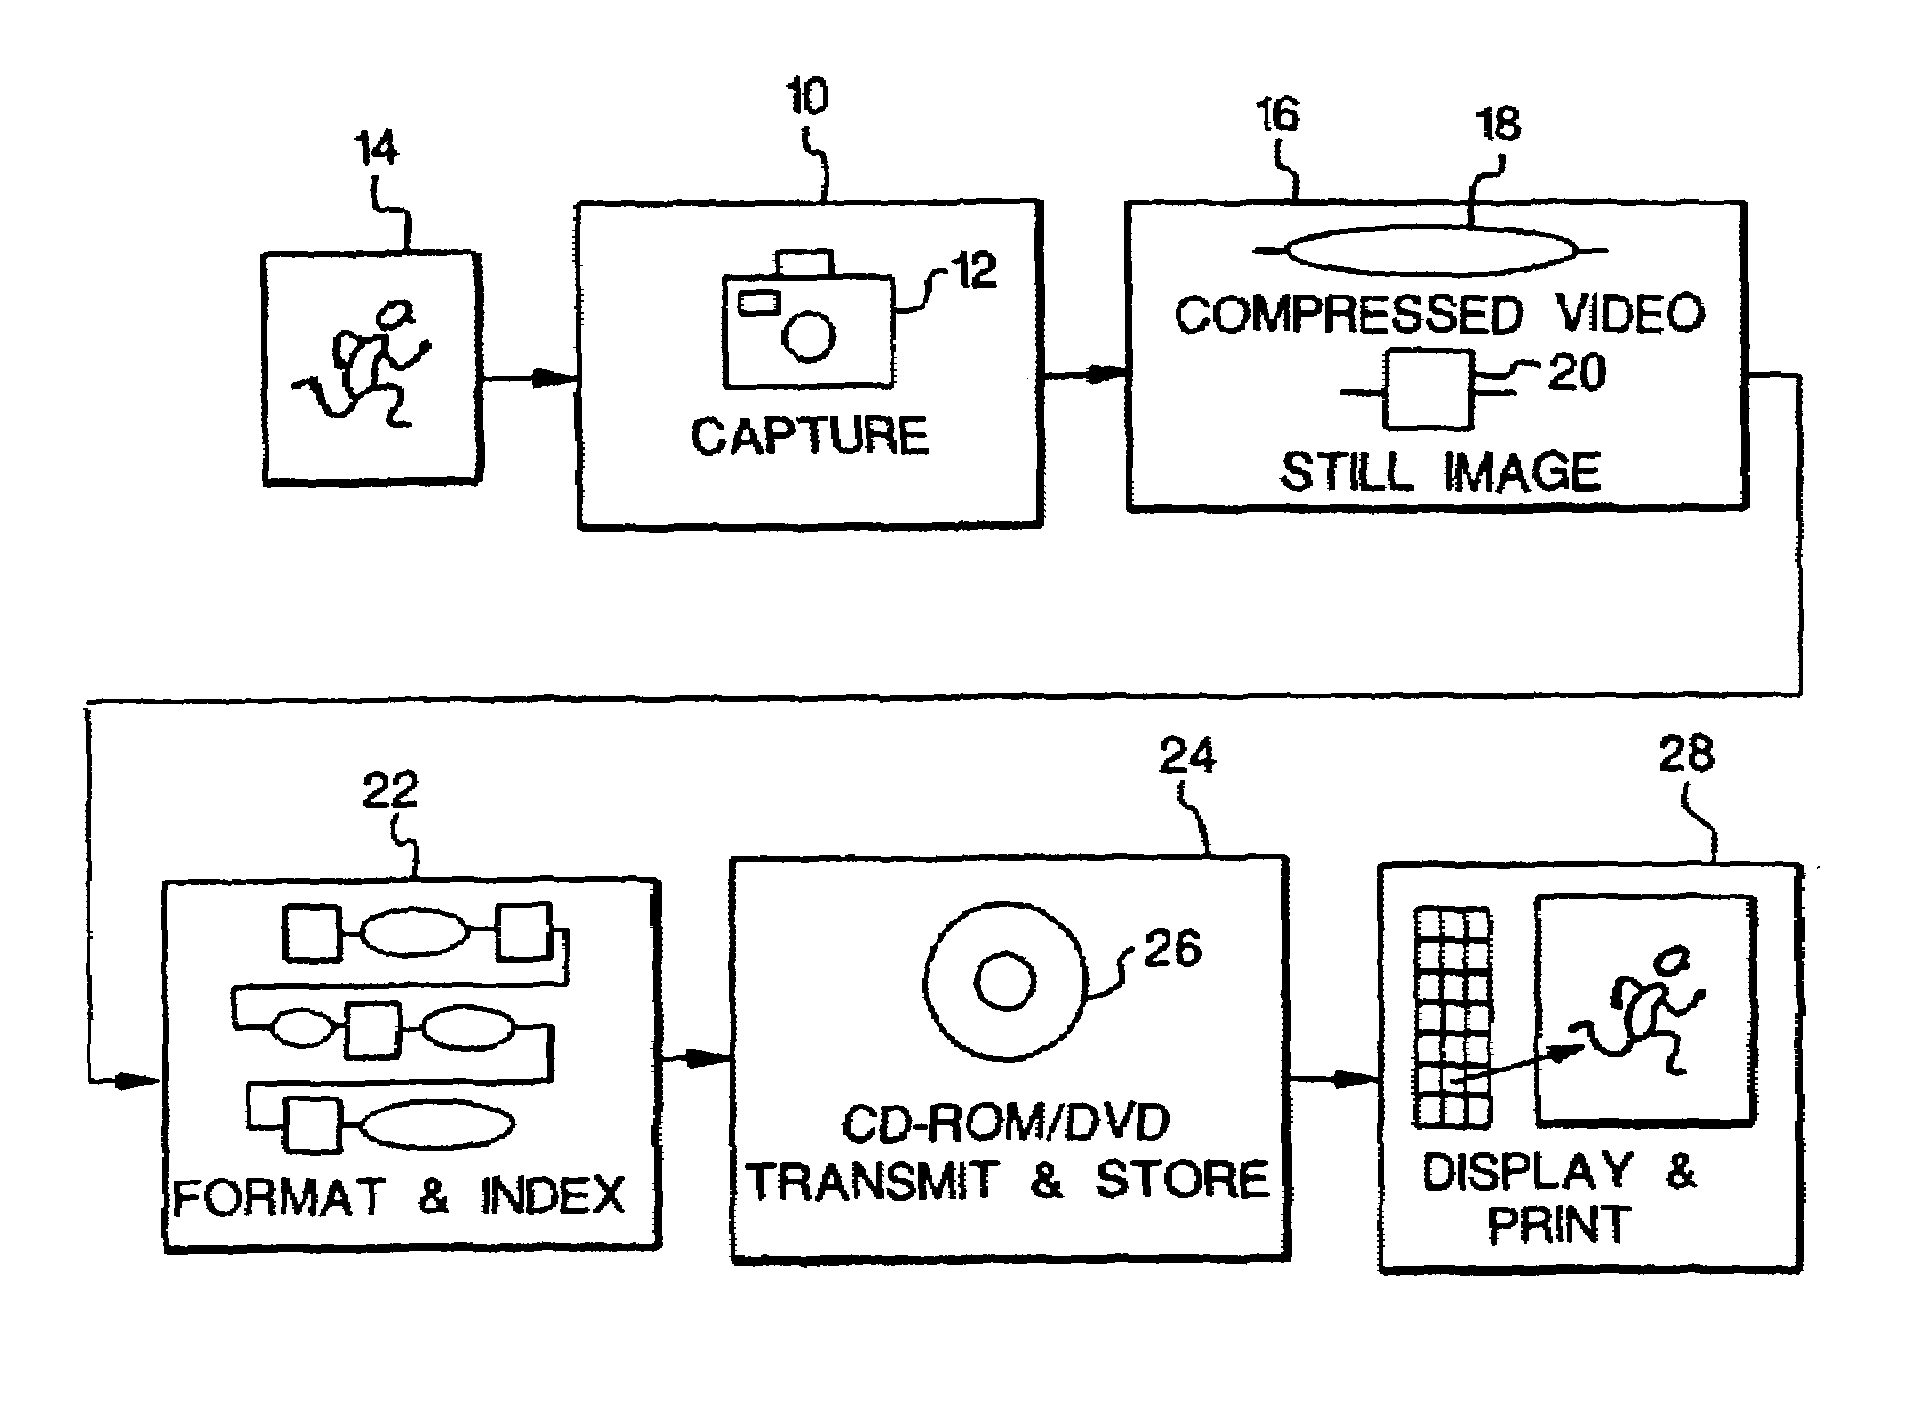 Integrated motion-still capture system with indexing capability